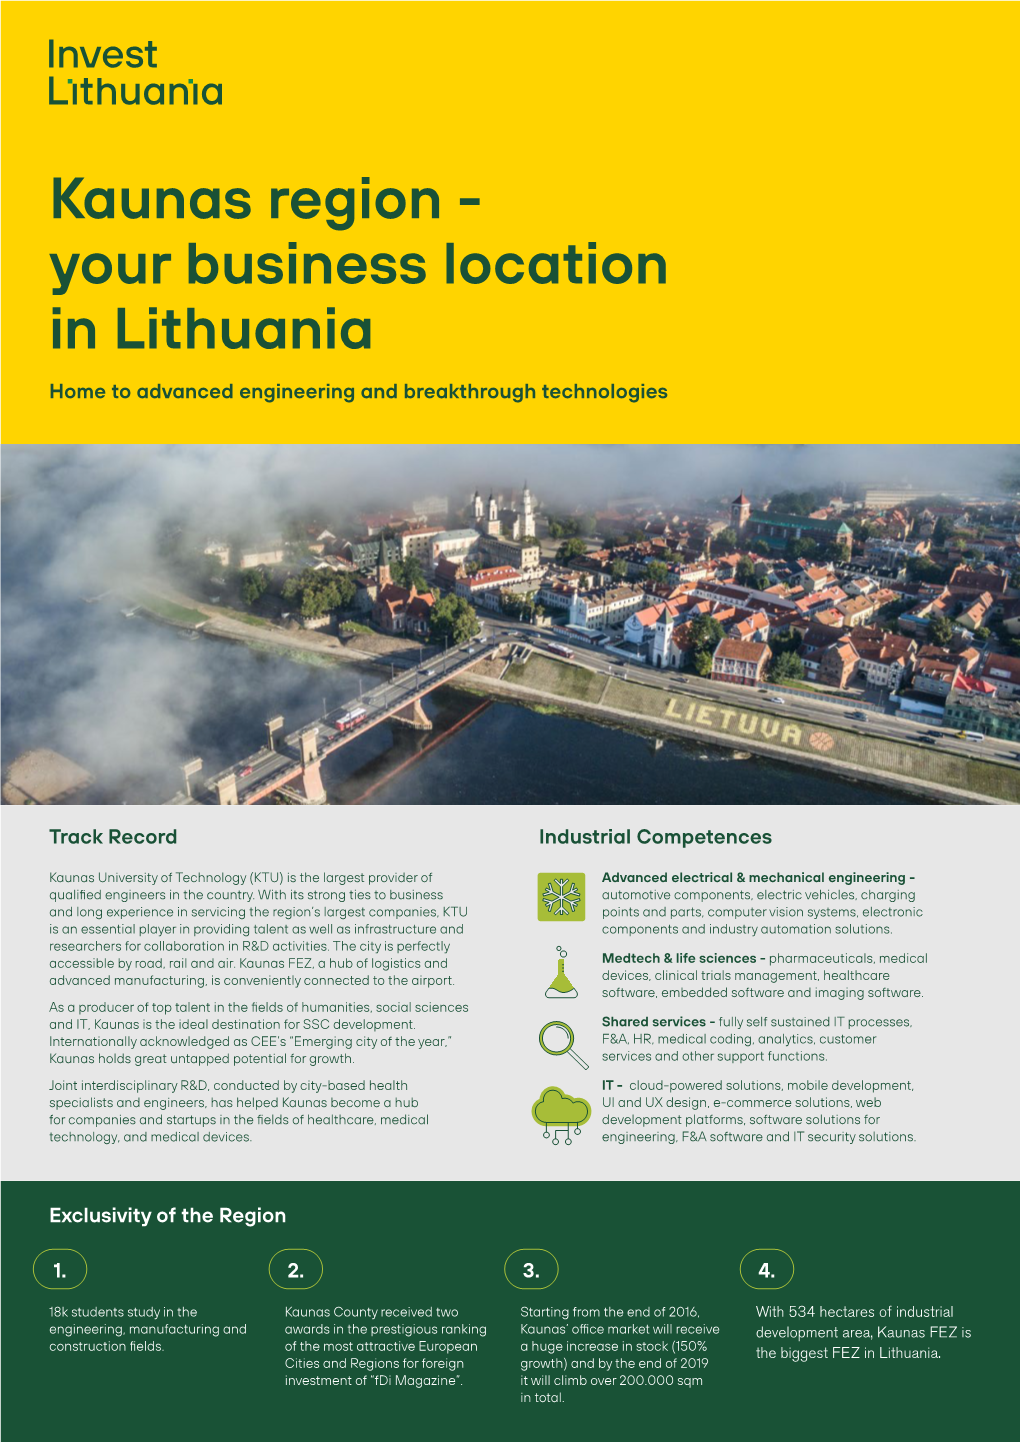 Kaunas Region - Your Business Location in Lithuania Home to Advanced Engineering and Breakthrough Technologies